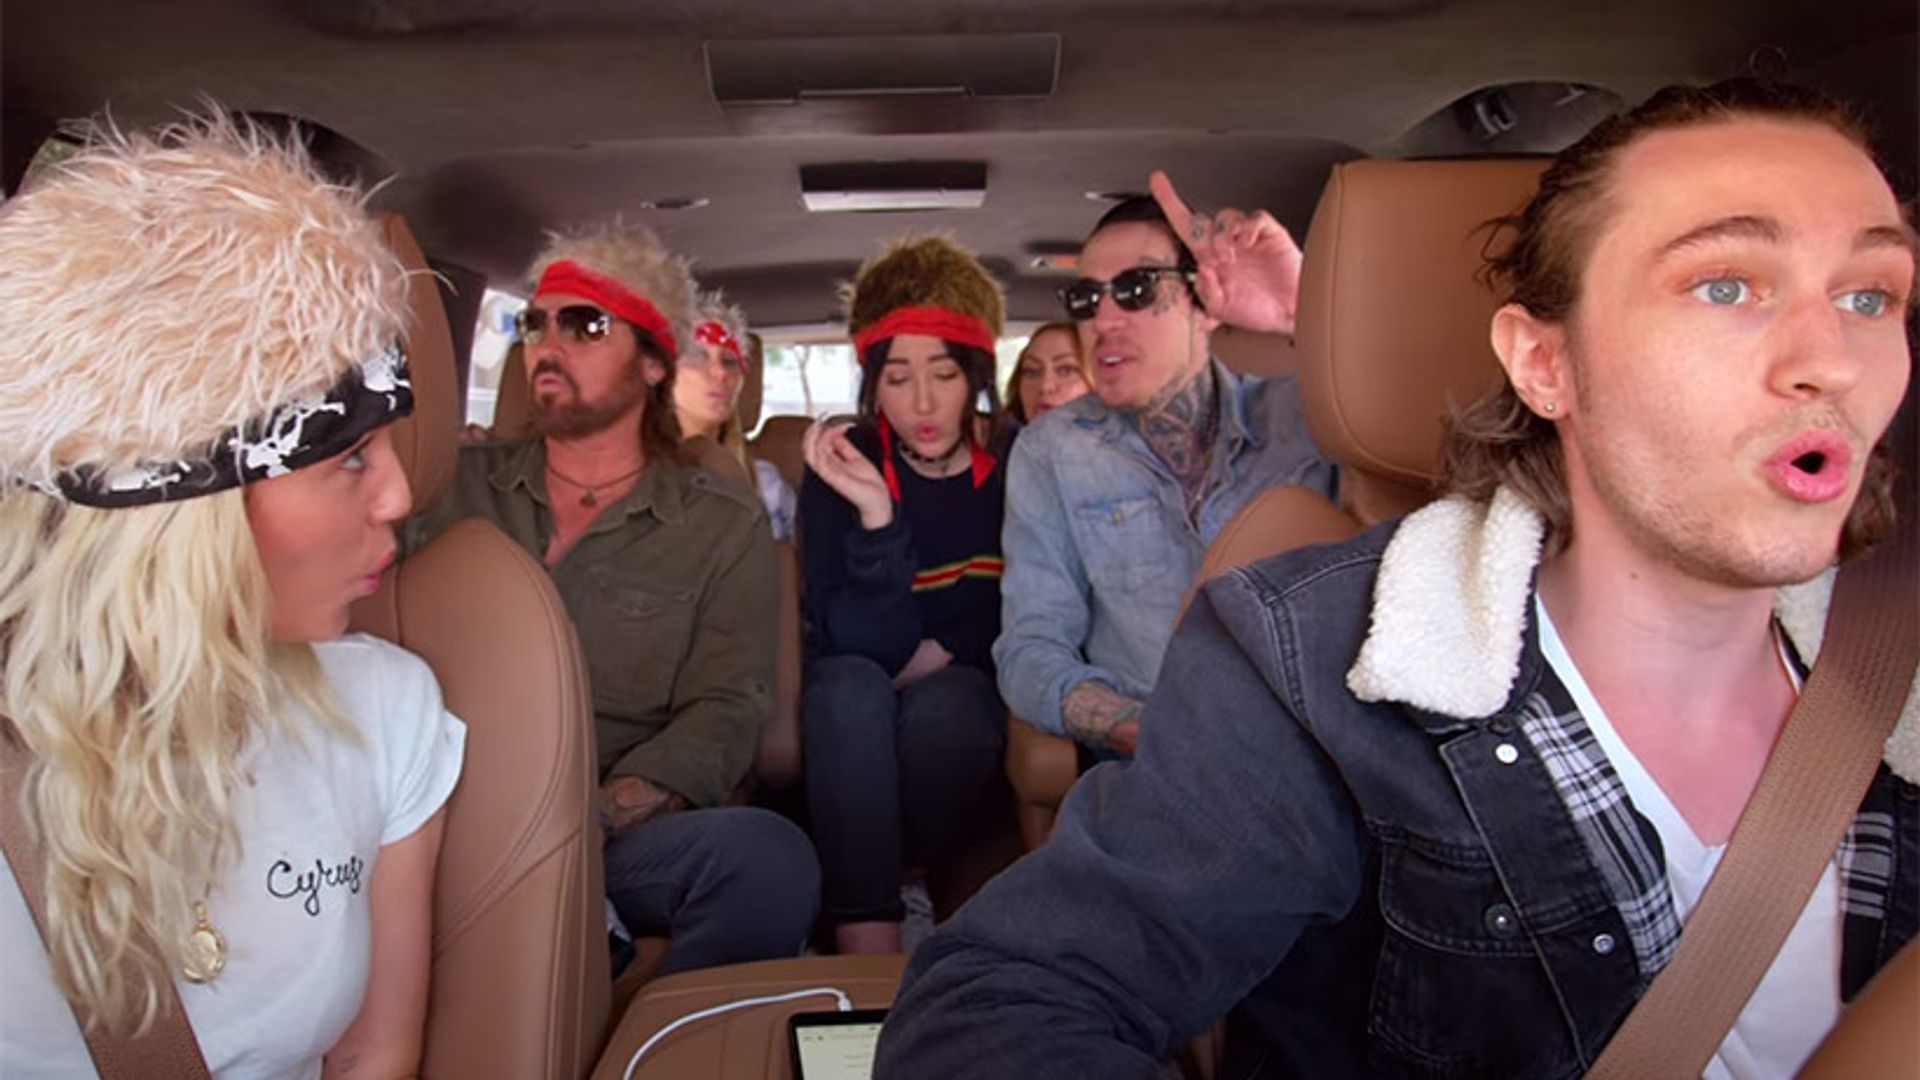 WATCH: Miley Cyrus is joined by whole family in new Carpool Karaoke